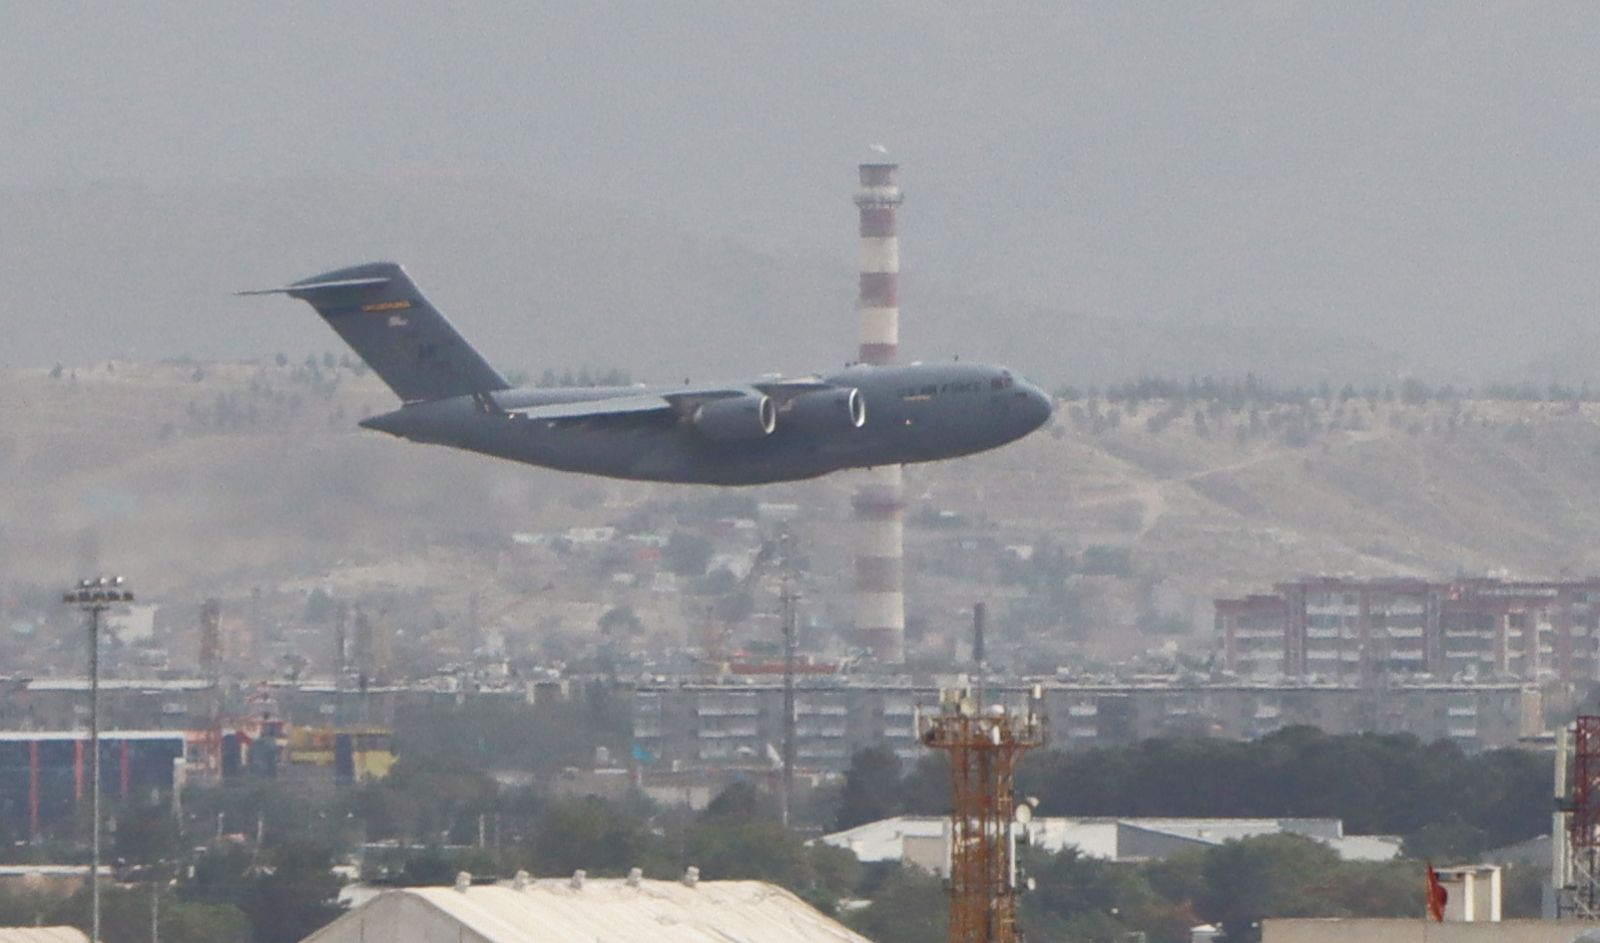 epa09436853 A Military aircraft takes off at the Hamid Karzai International Airport in Kabul, Afghanistan, 30 August 2021. Multiple explosions rocked the capital city of Kabul on 30 August, a day before the final withdrawal of foreign troops from Afghanistan.  EPA/STRINGER